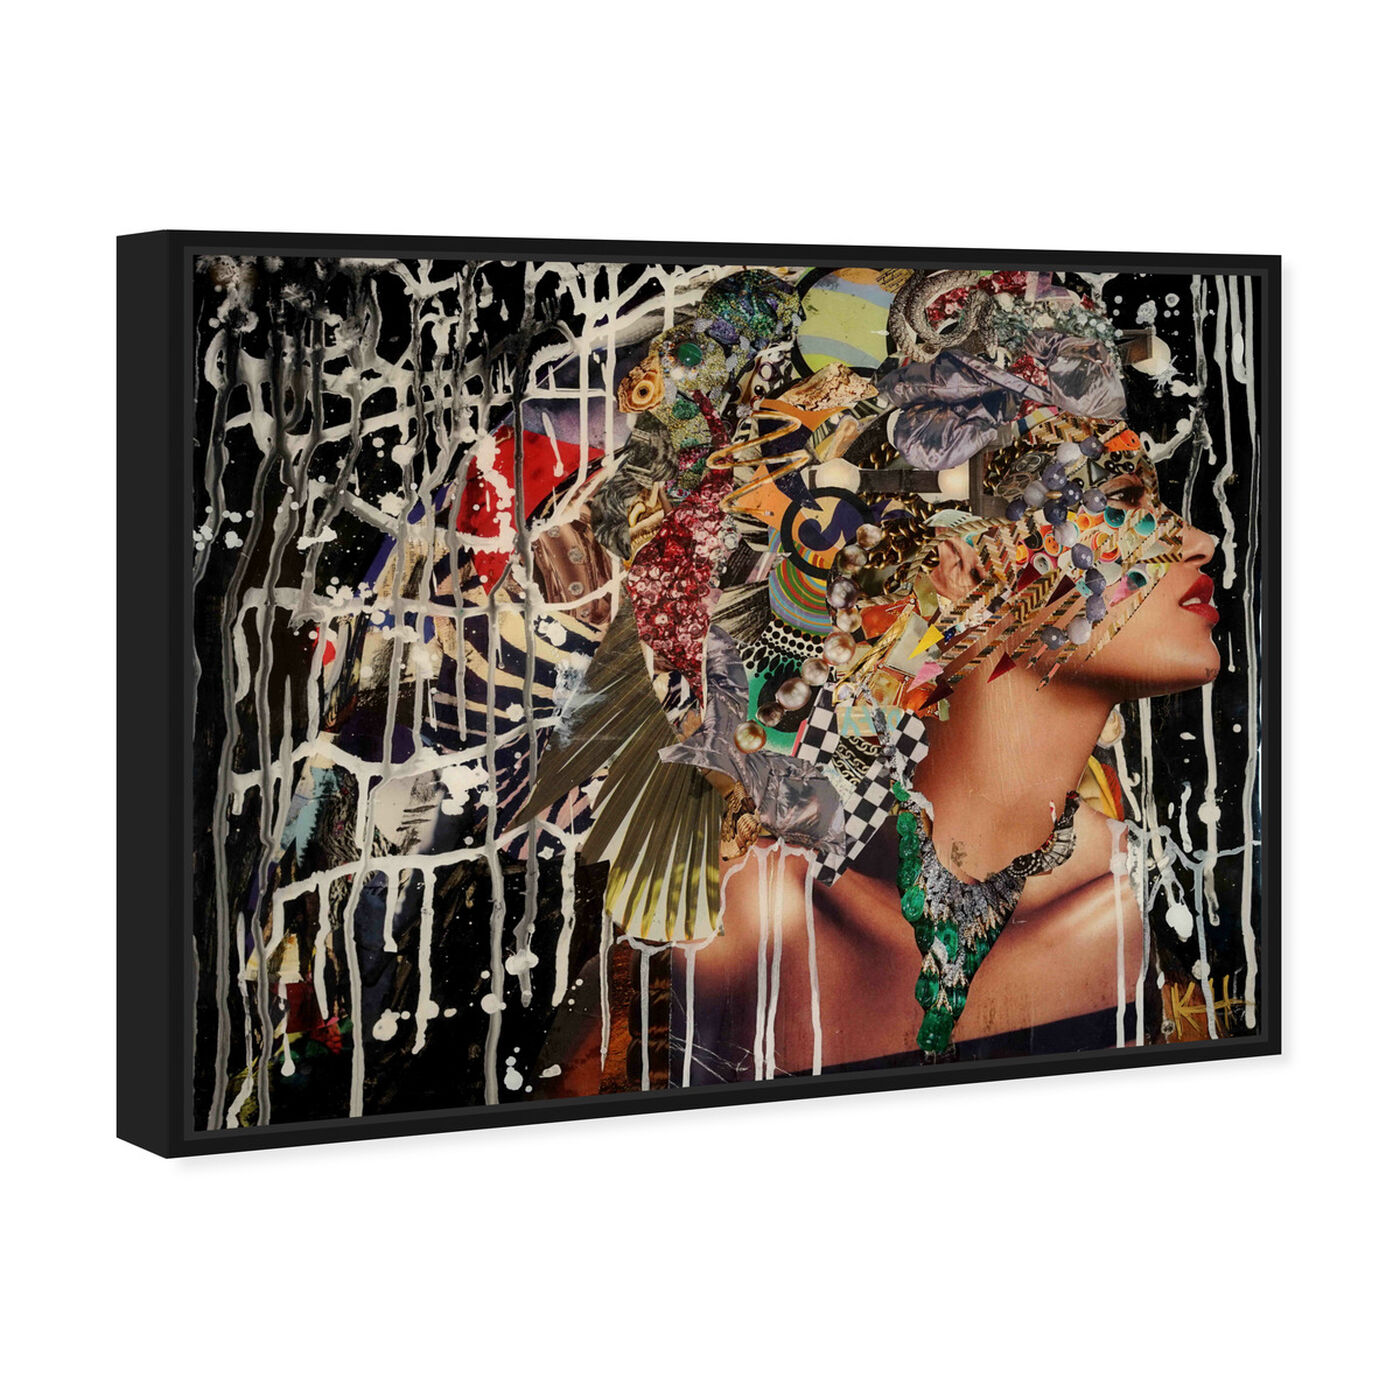 Angled view of Katy Hirschfeld - Tribal and Wild featuring fashion and glam and portraits art.